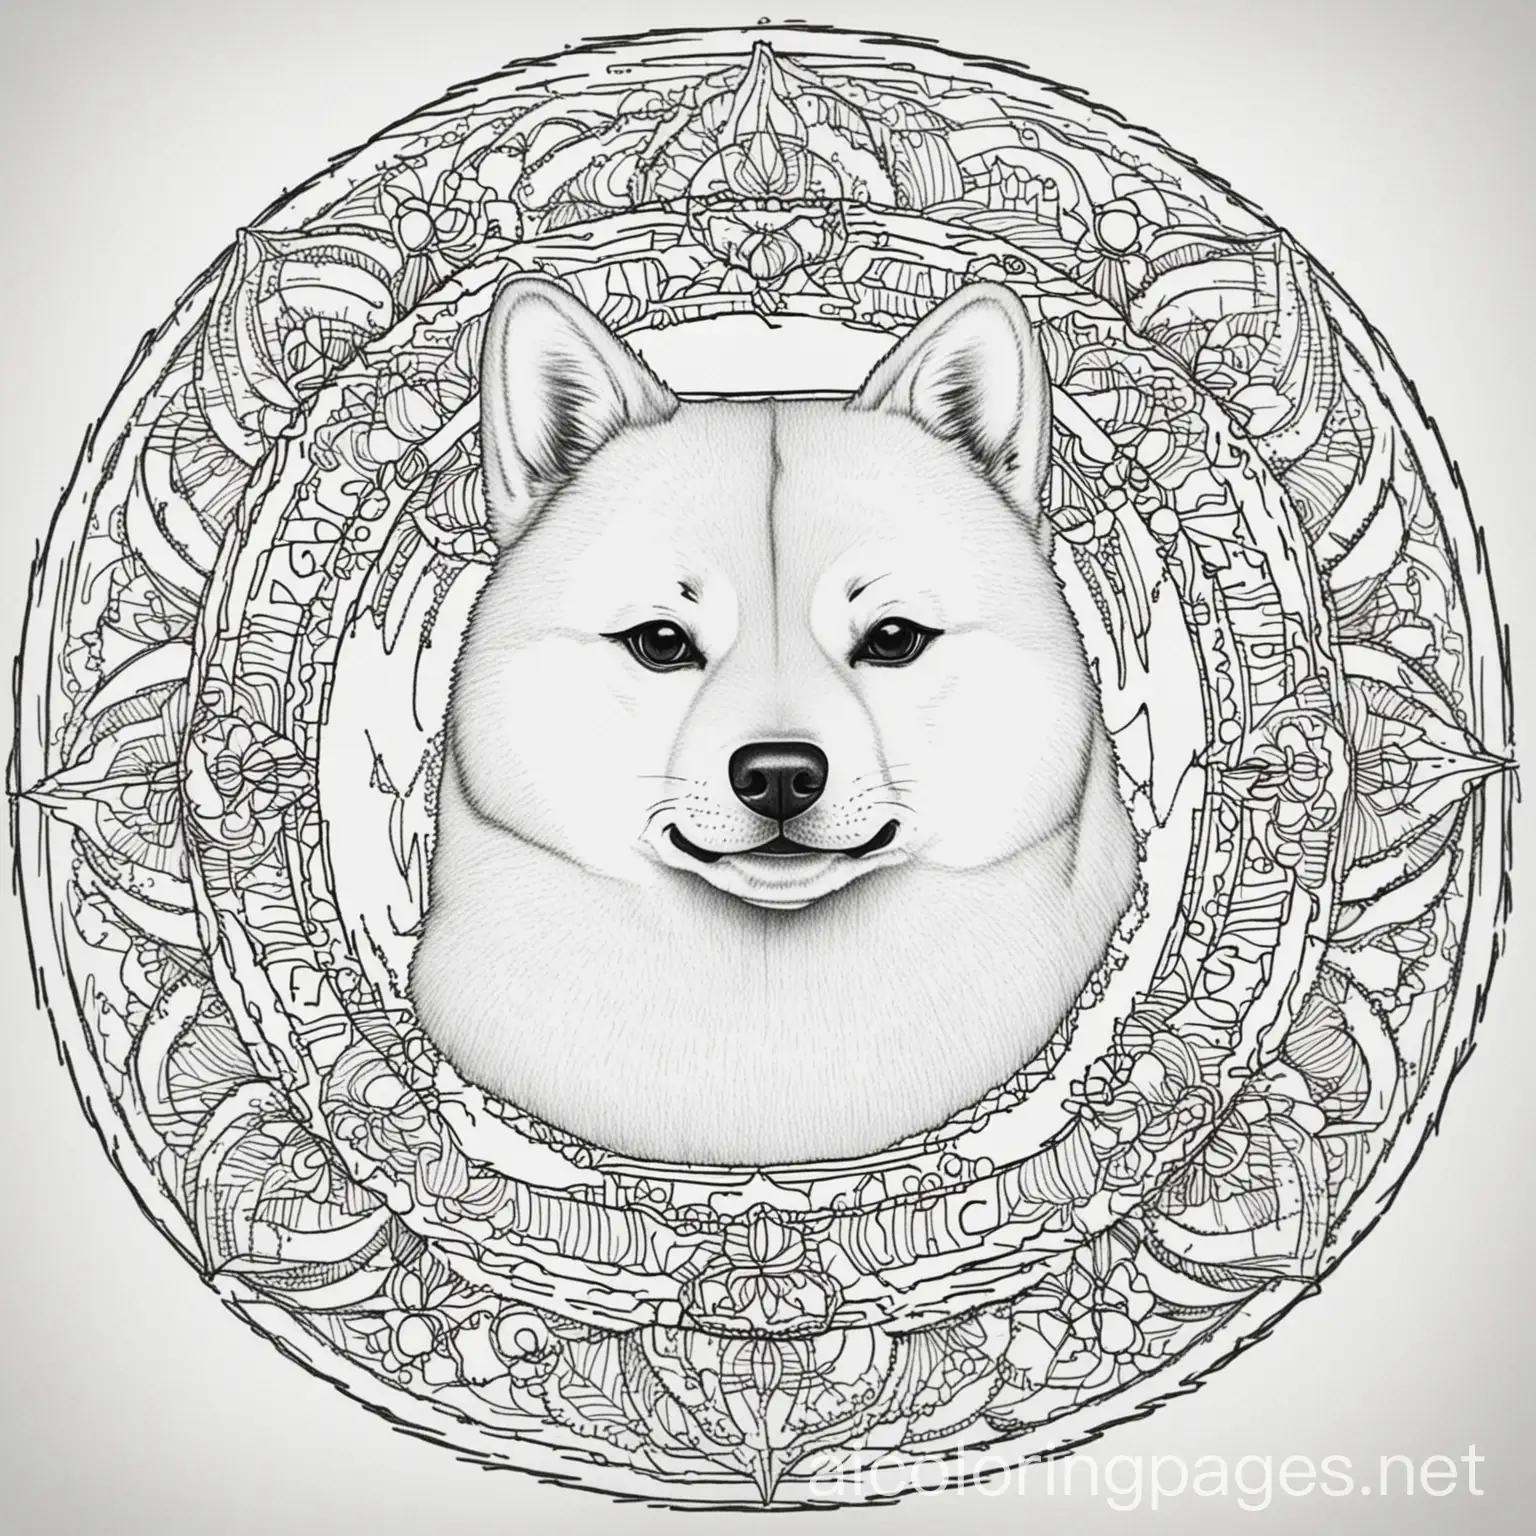 Shiba Inu dog  mandala coloring page
, Coloring Page, black and white, line art, white background, Simplicity, Ample White Space. The background of the coloring page is plain white to make it easy for young children to color within the lines. The outlines of all the subjects are easy to distinguish, making it simple for kids to color without too much difficulty